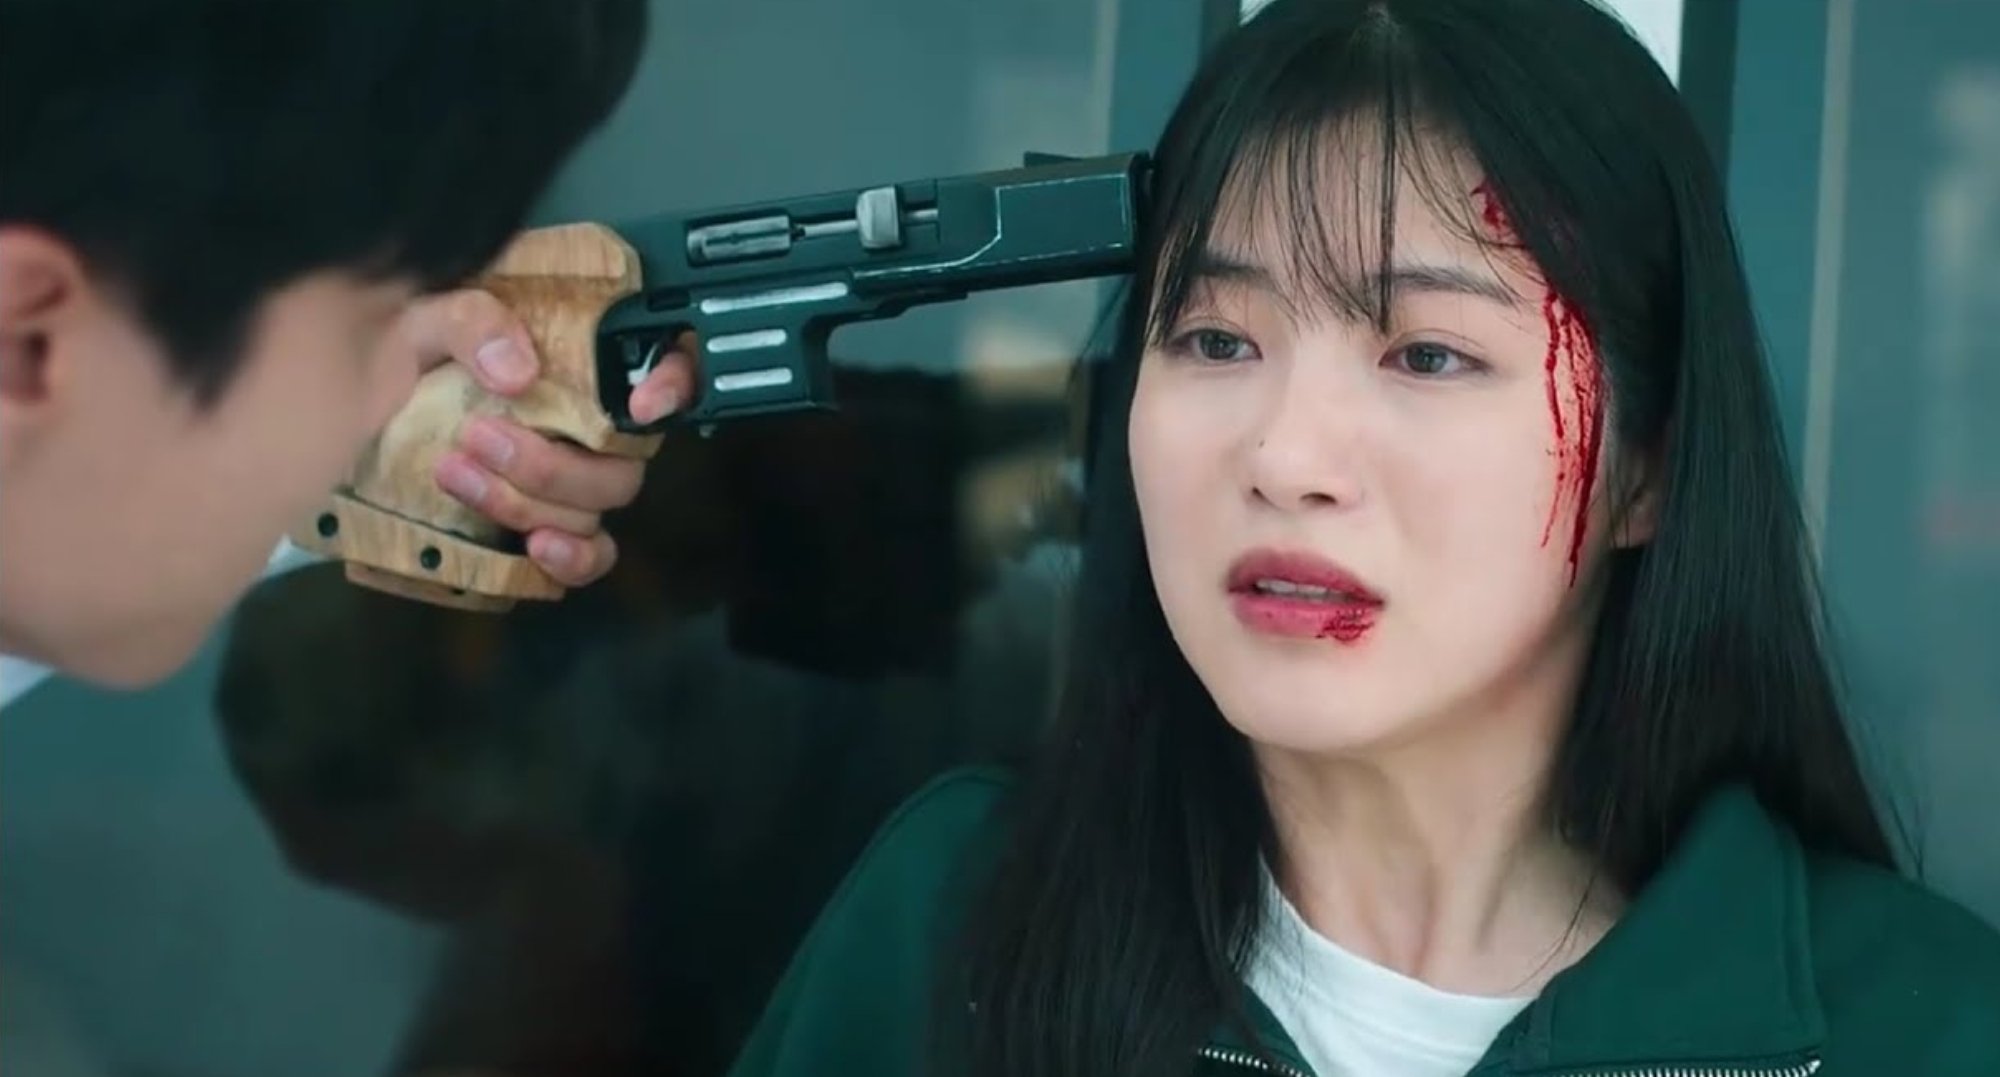 Chan-mi held at gunpoint by Jae-jin in 'Reveng of Others' finale.